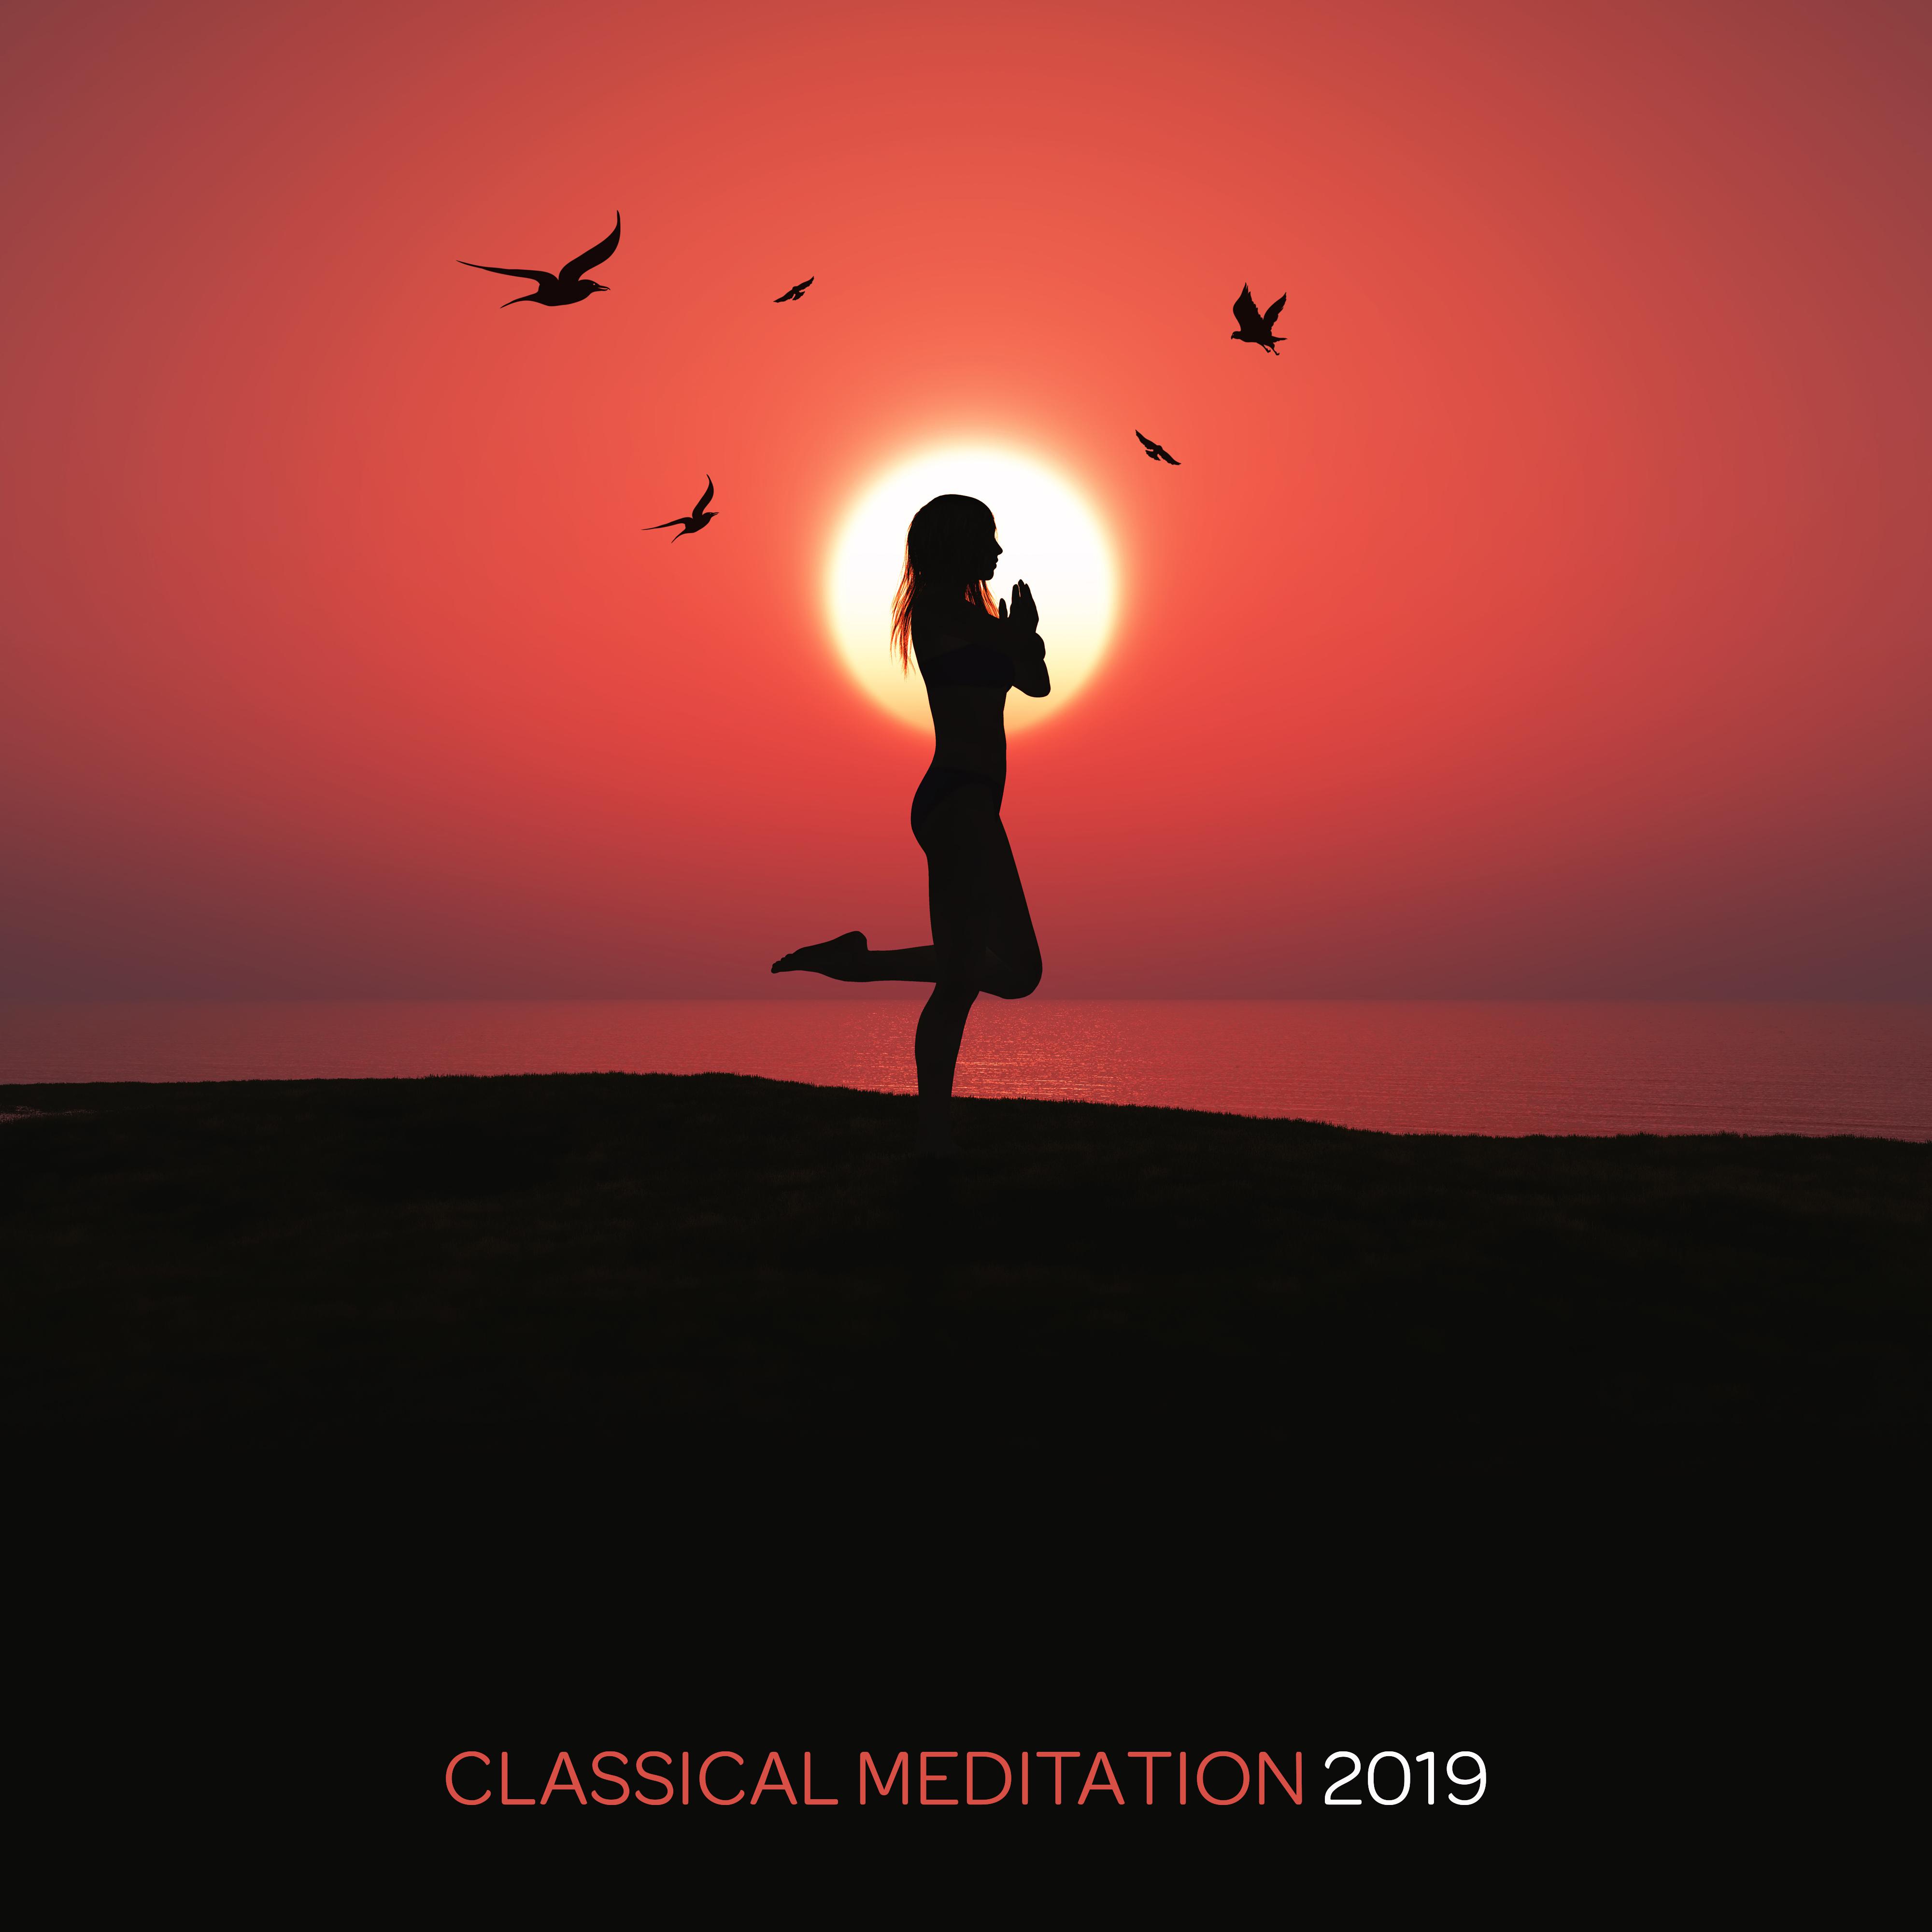 Classical Meditation 2019  Meditation Music Zone, Yoga Meditation, Yoga Bliss, Mindful Meditation, Reiki Healing, Soothing Sounds for Relaxation, Sleep, Yoga